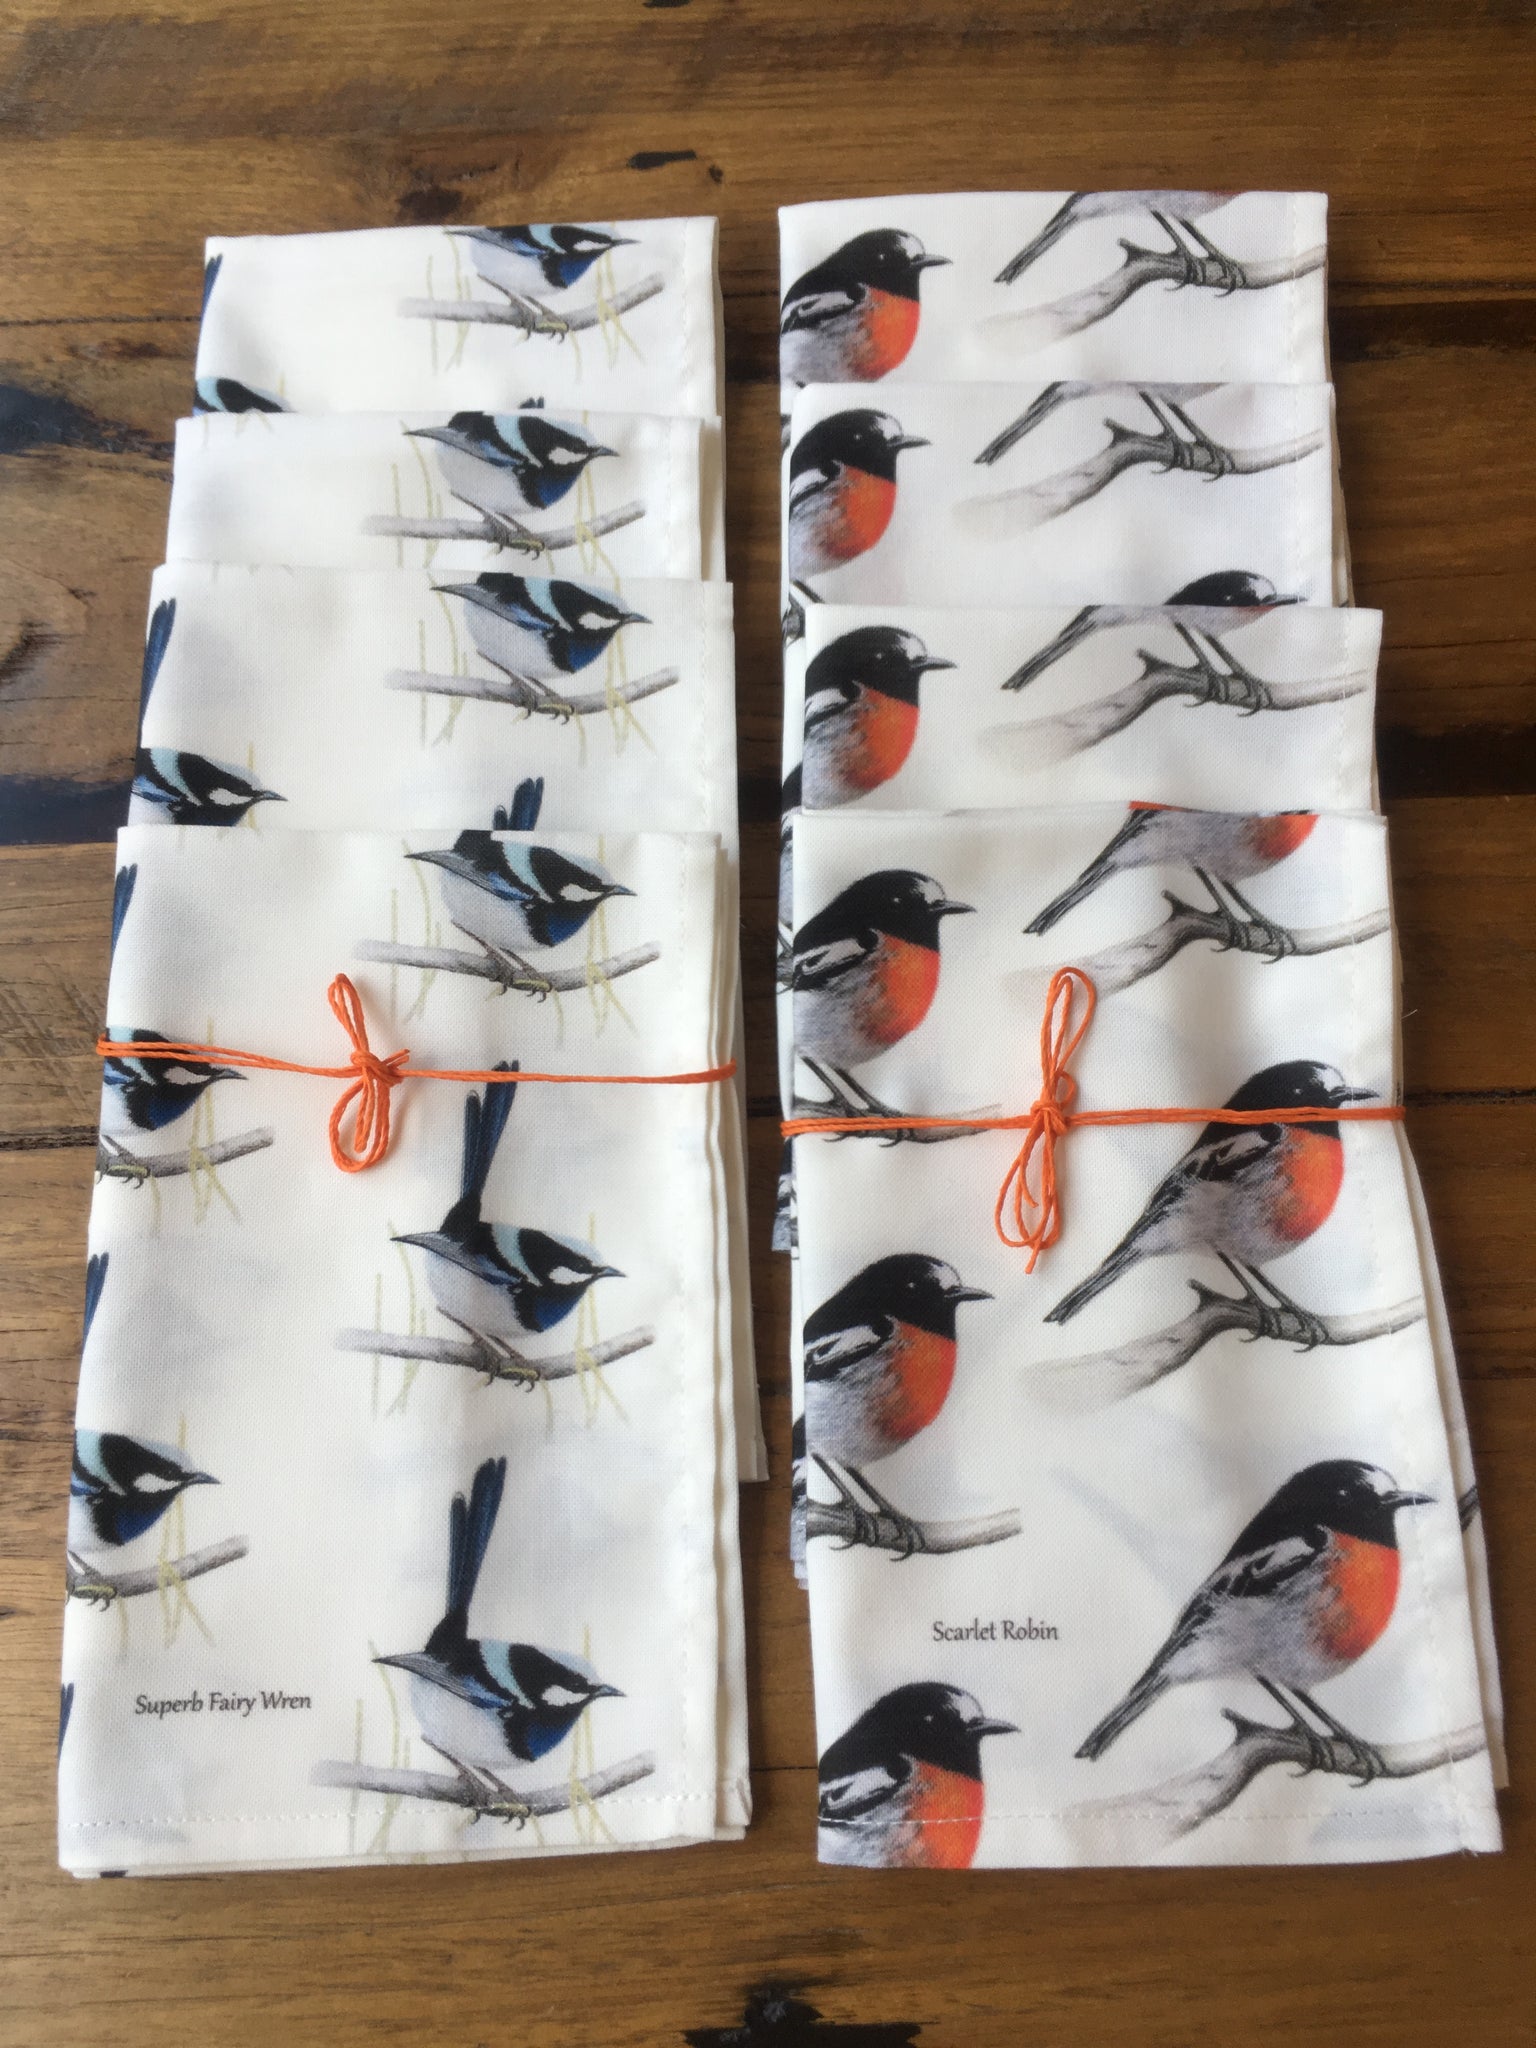 Cloth napkins and serviettes with images of a Scarlet Robin repeating and a Superb Fairy Wren repeating